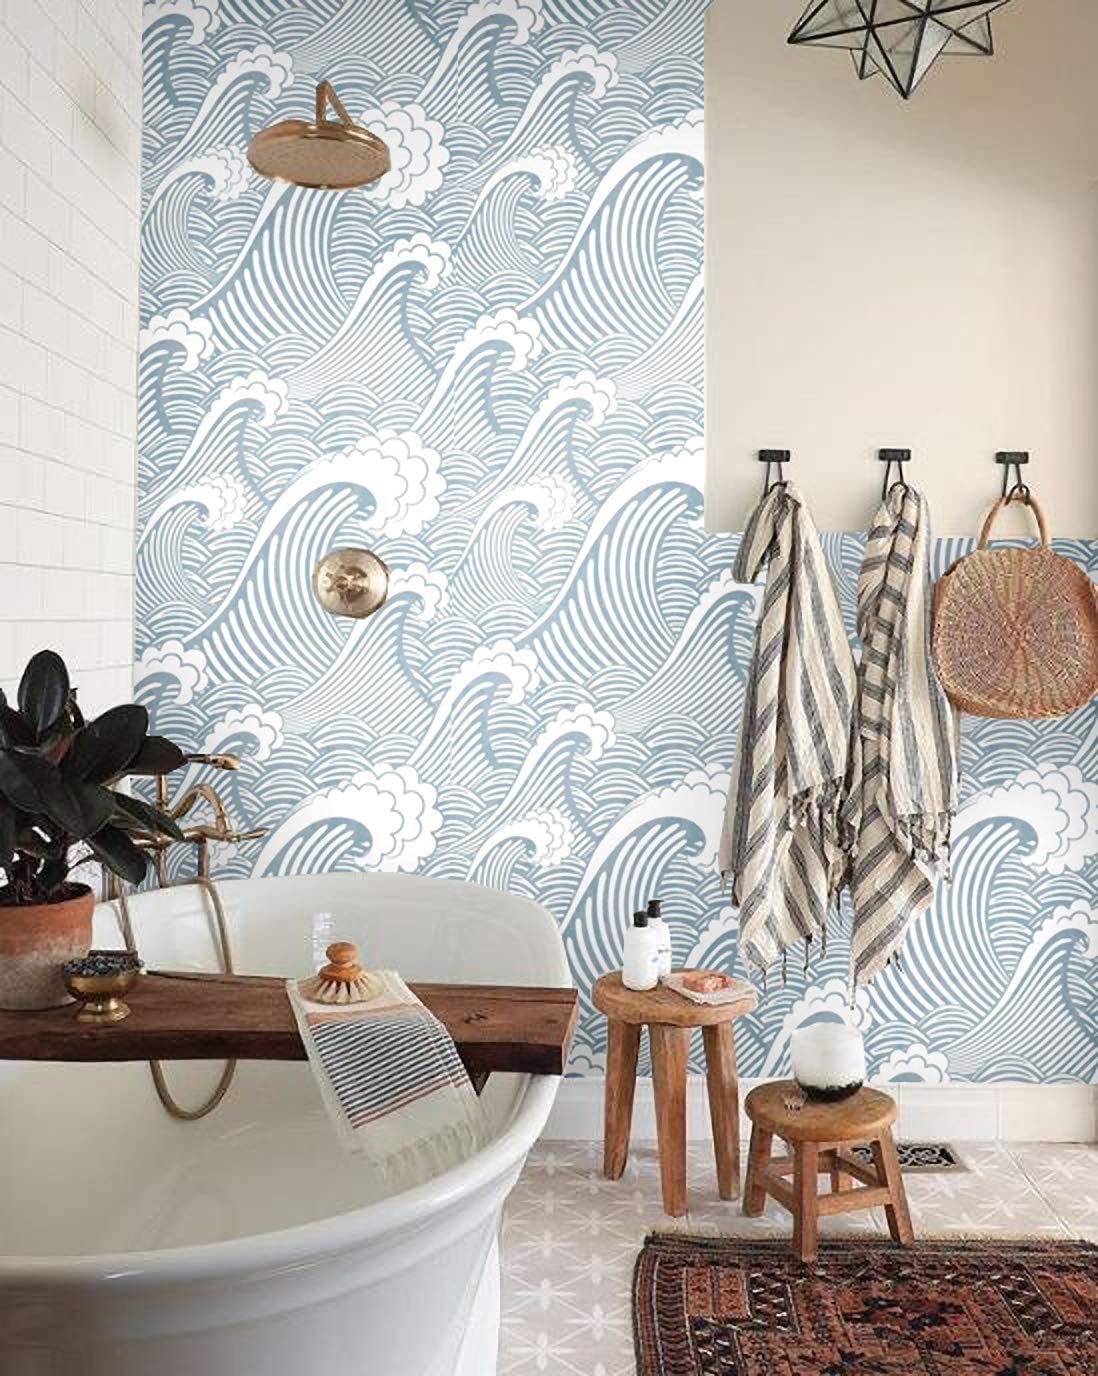 Painted Blue/White Waves Peel And Stick Wallpaper